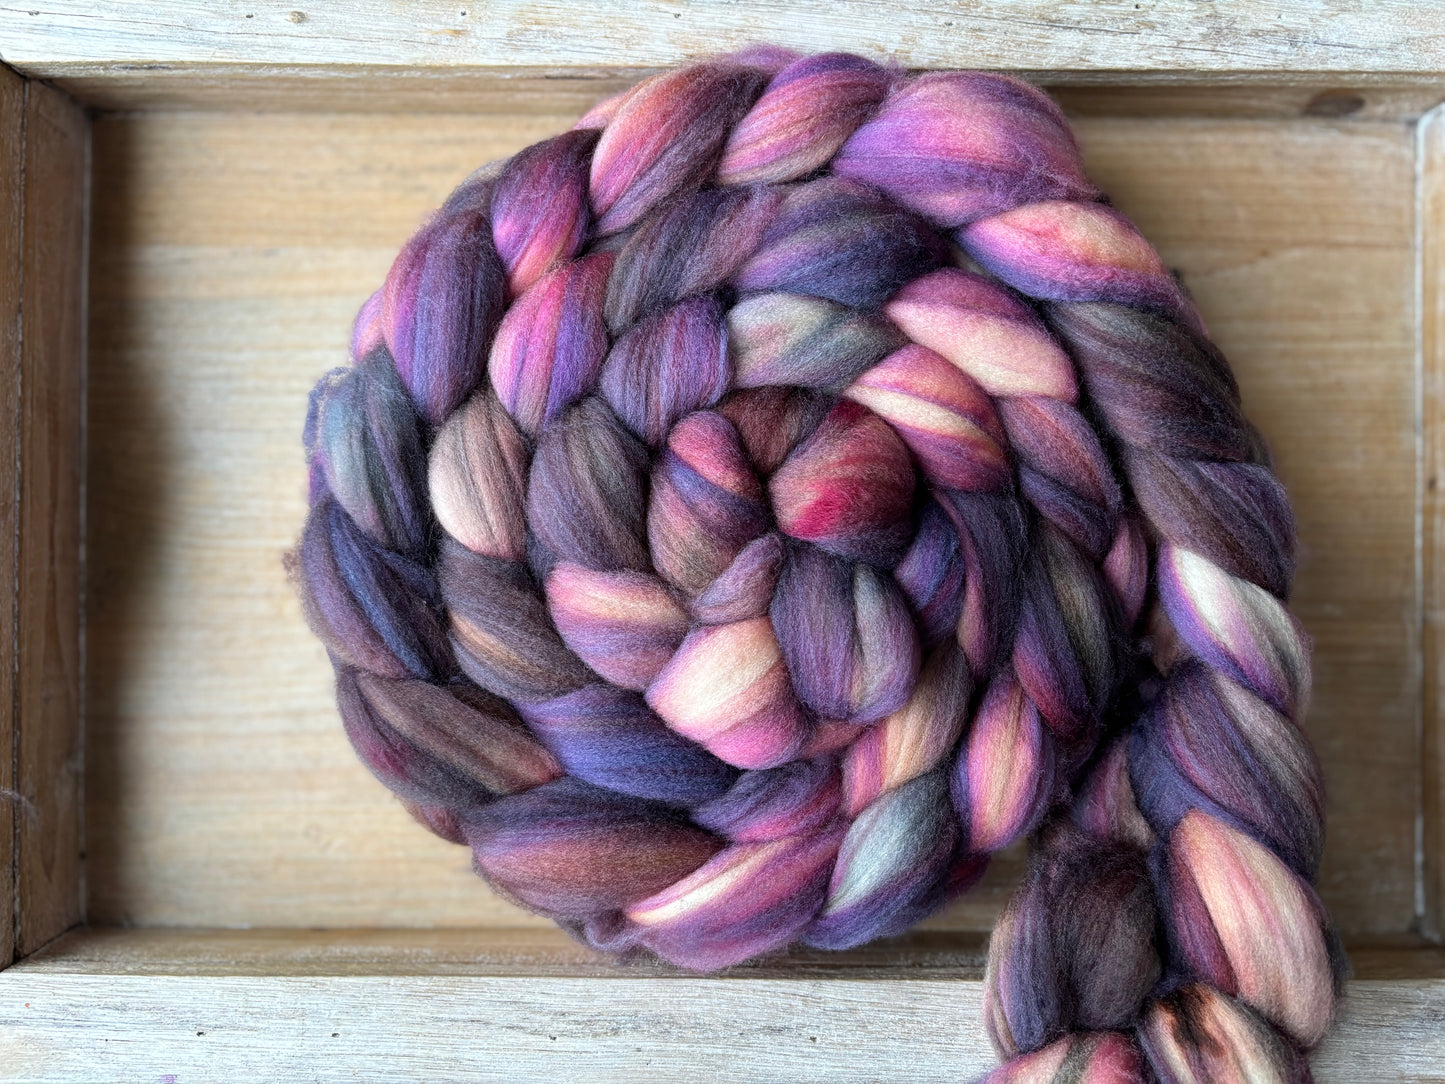 100 grams of Spinning Fibre - Superwash Merino Wool 22 Micron - Hand Dyed Combed Top